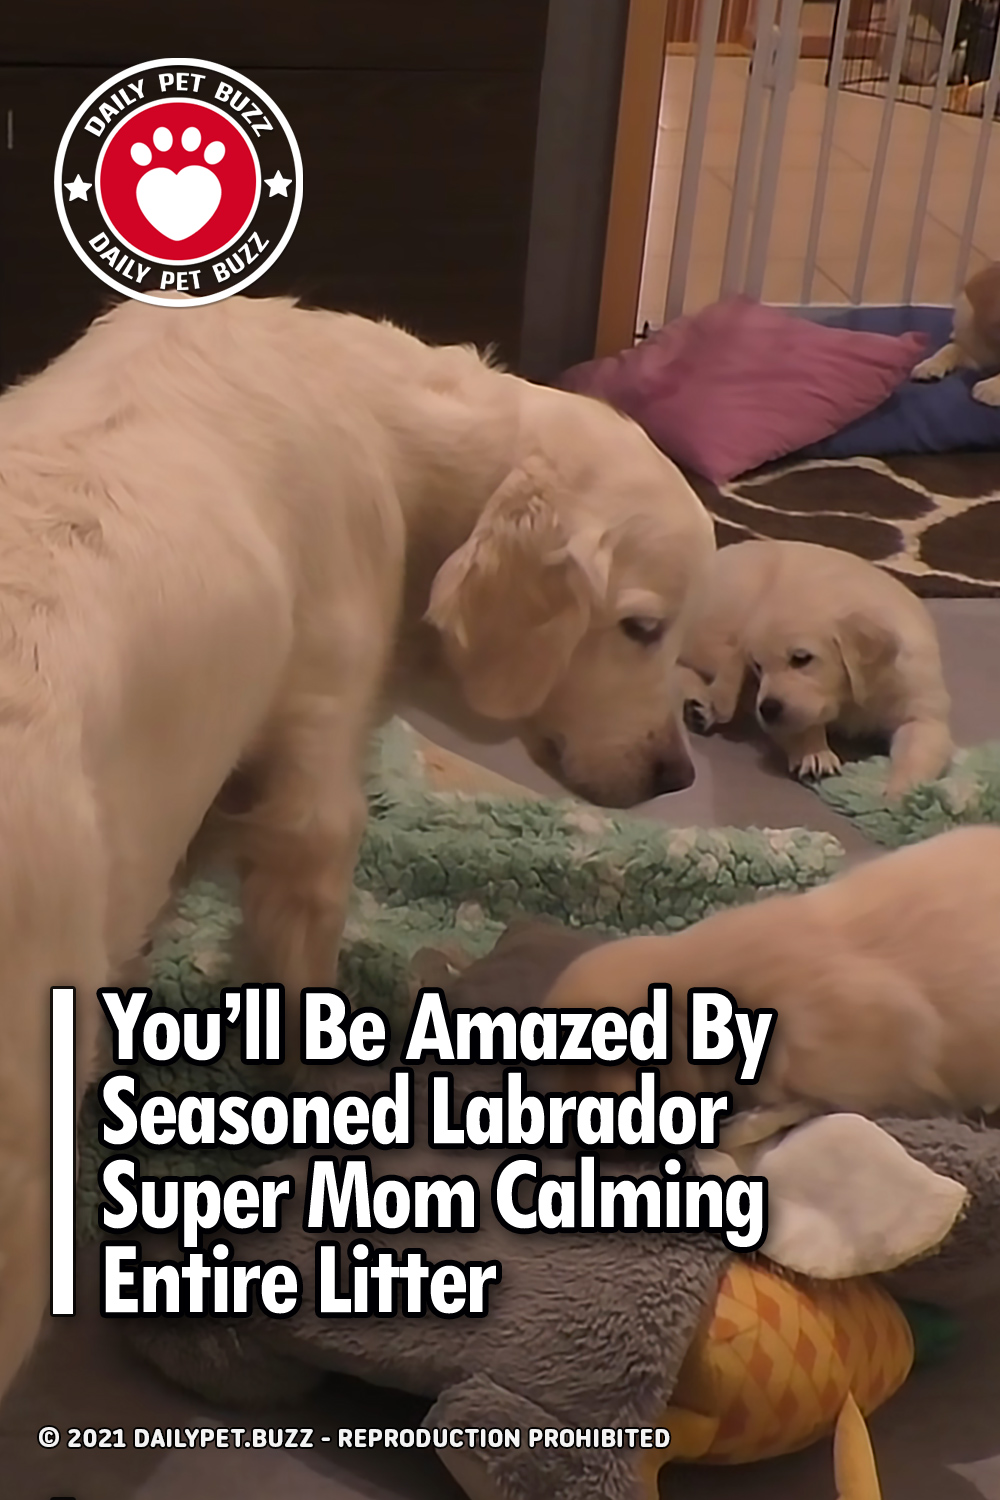 You’ll Be Amazed By Seasoned Labrador Super Mom Calming Entire Litter